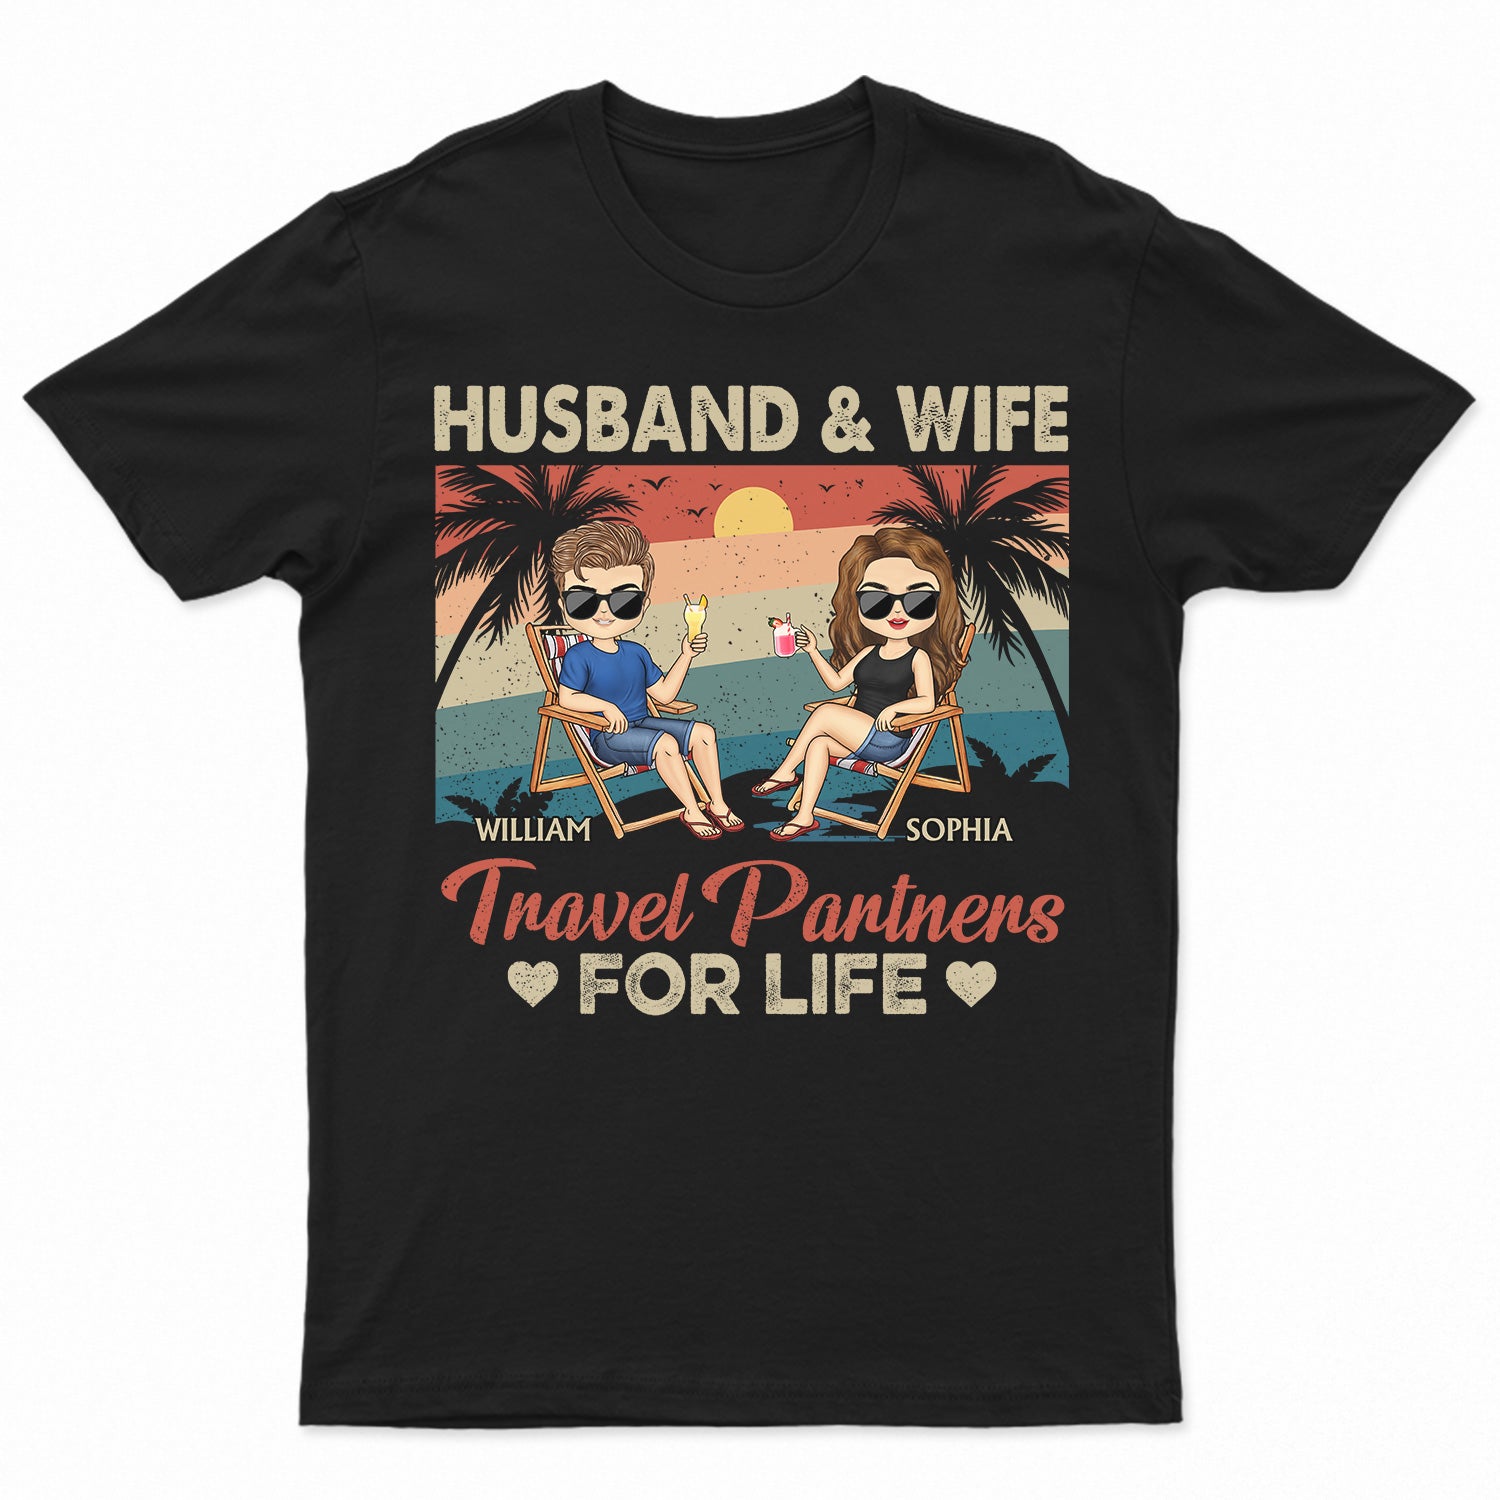 Travel Partners For Life - Gift For Traveling Lovers, Couples, Husband, Wife - Personalized T Shirt